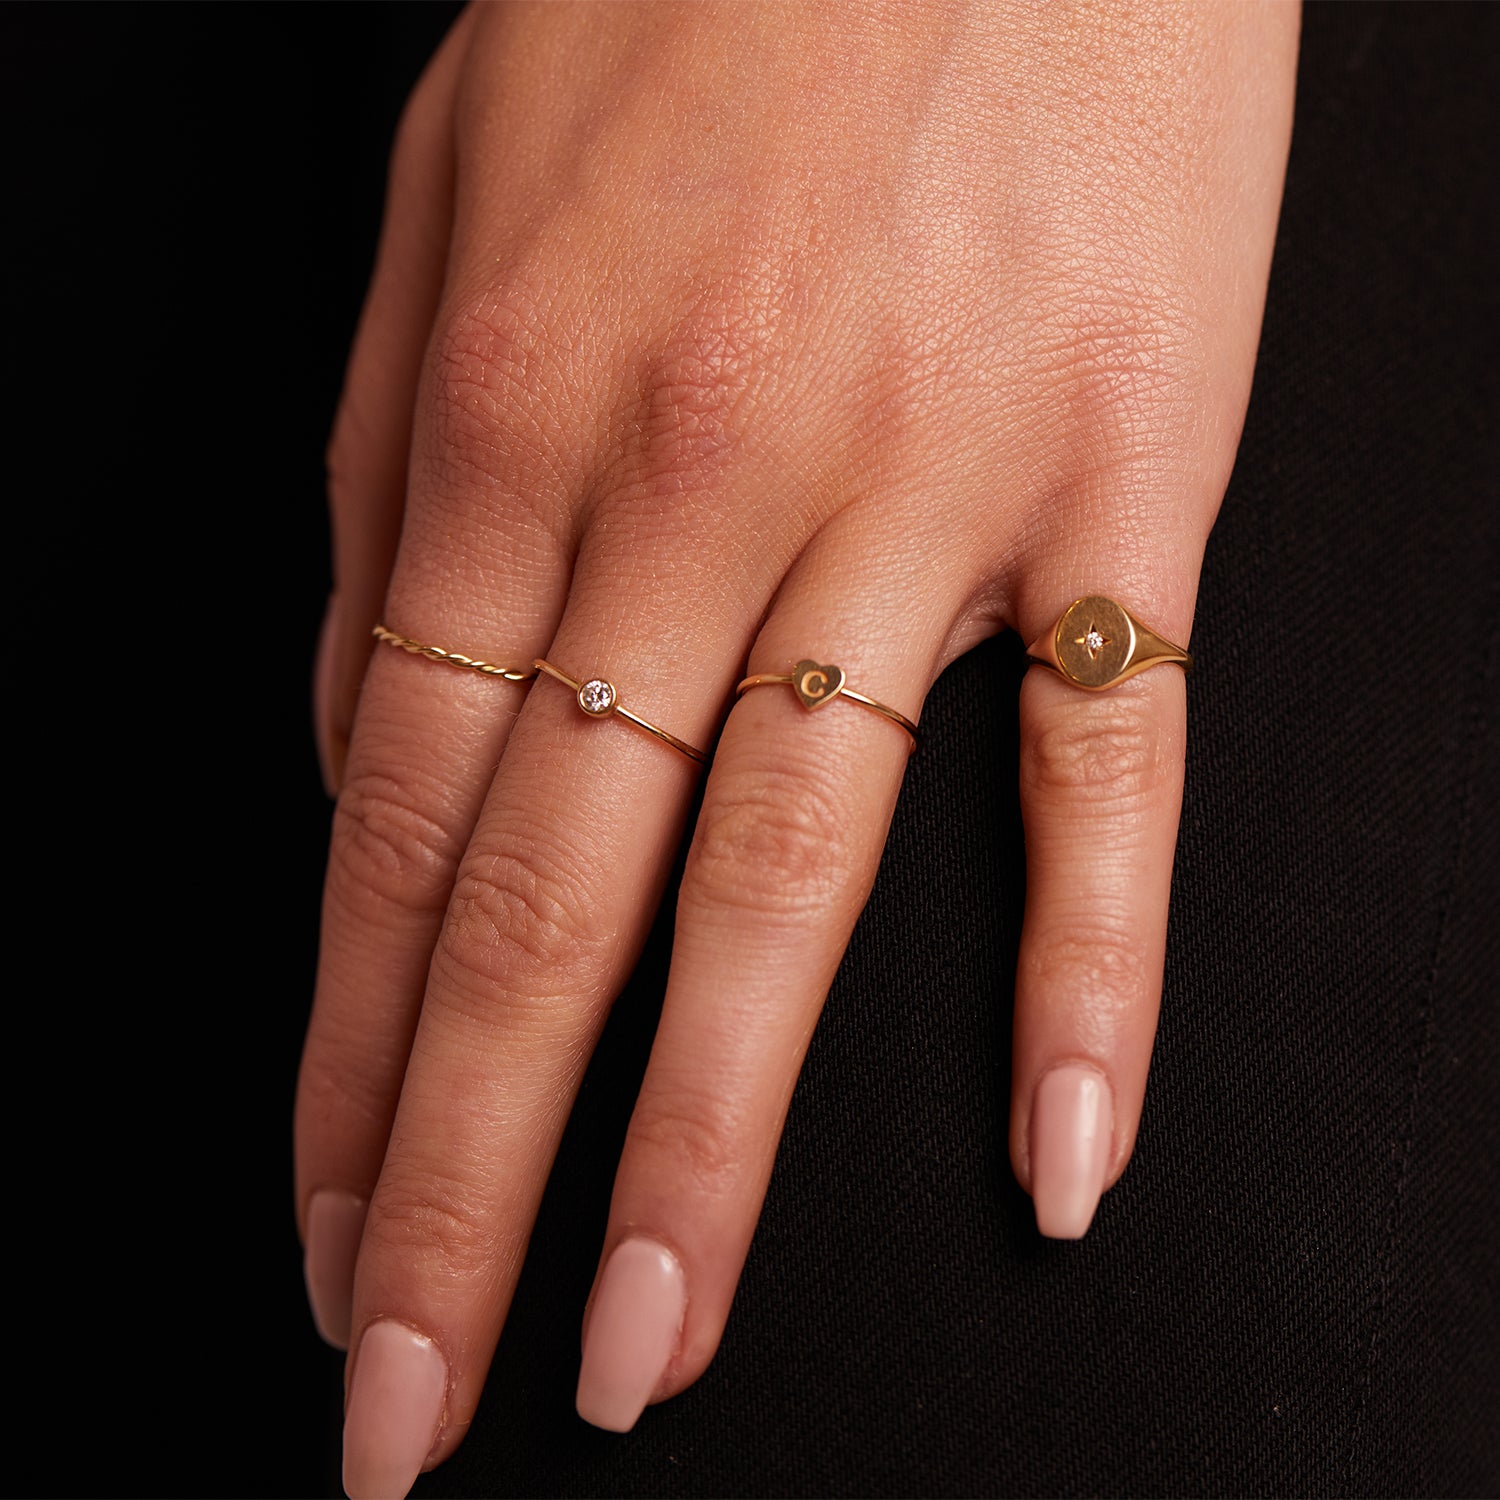 The “Baby” two finger ring - ΑΥΕΖΙ